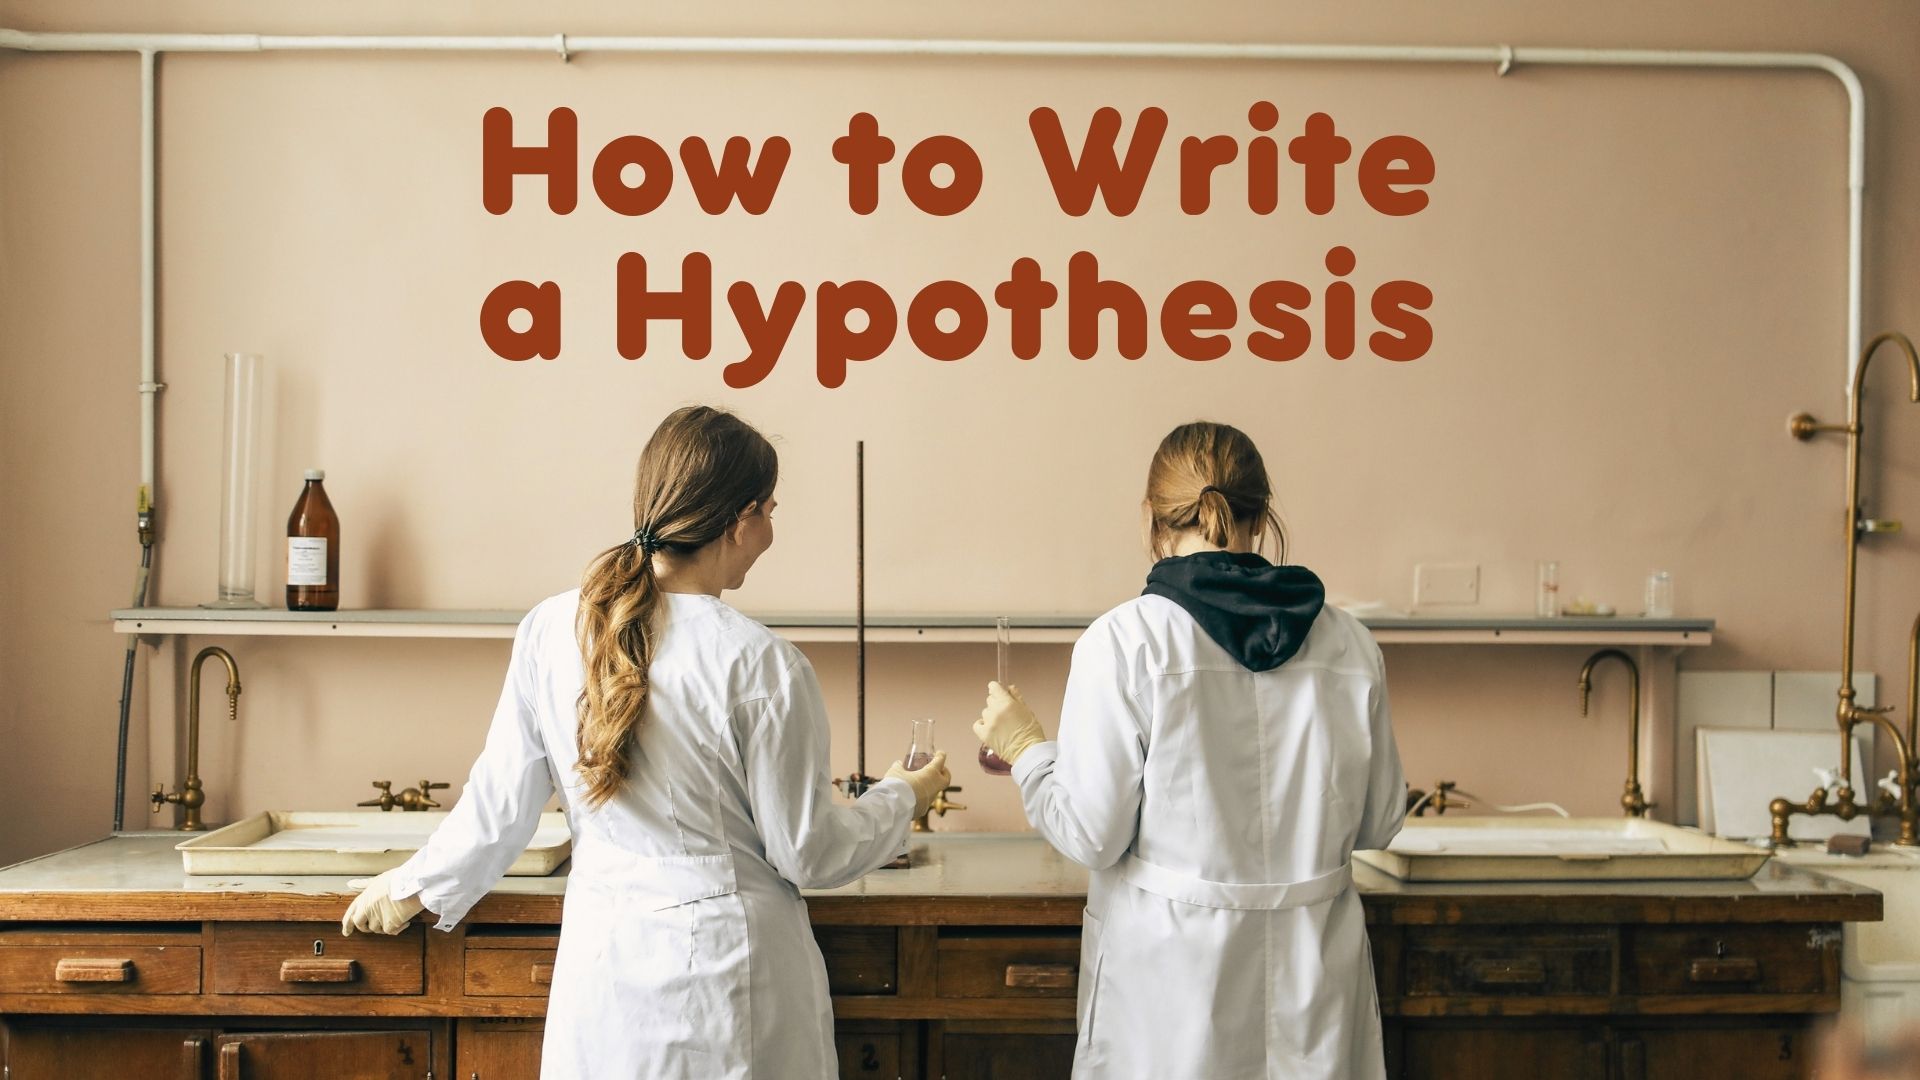 how to write a hypothesis